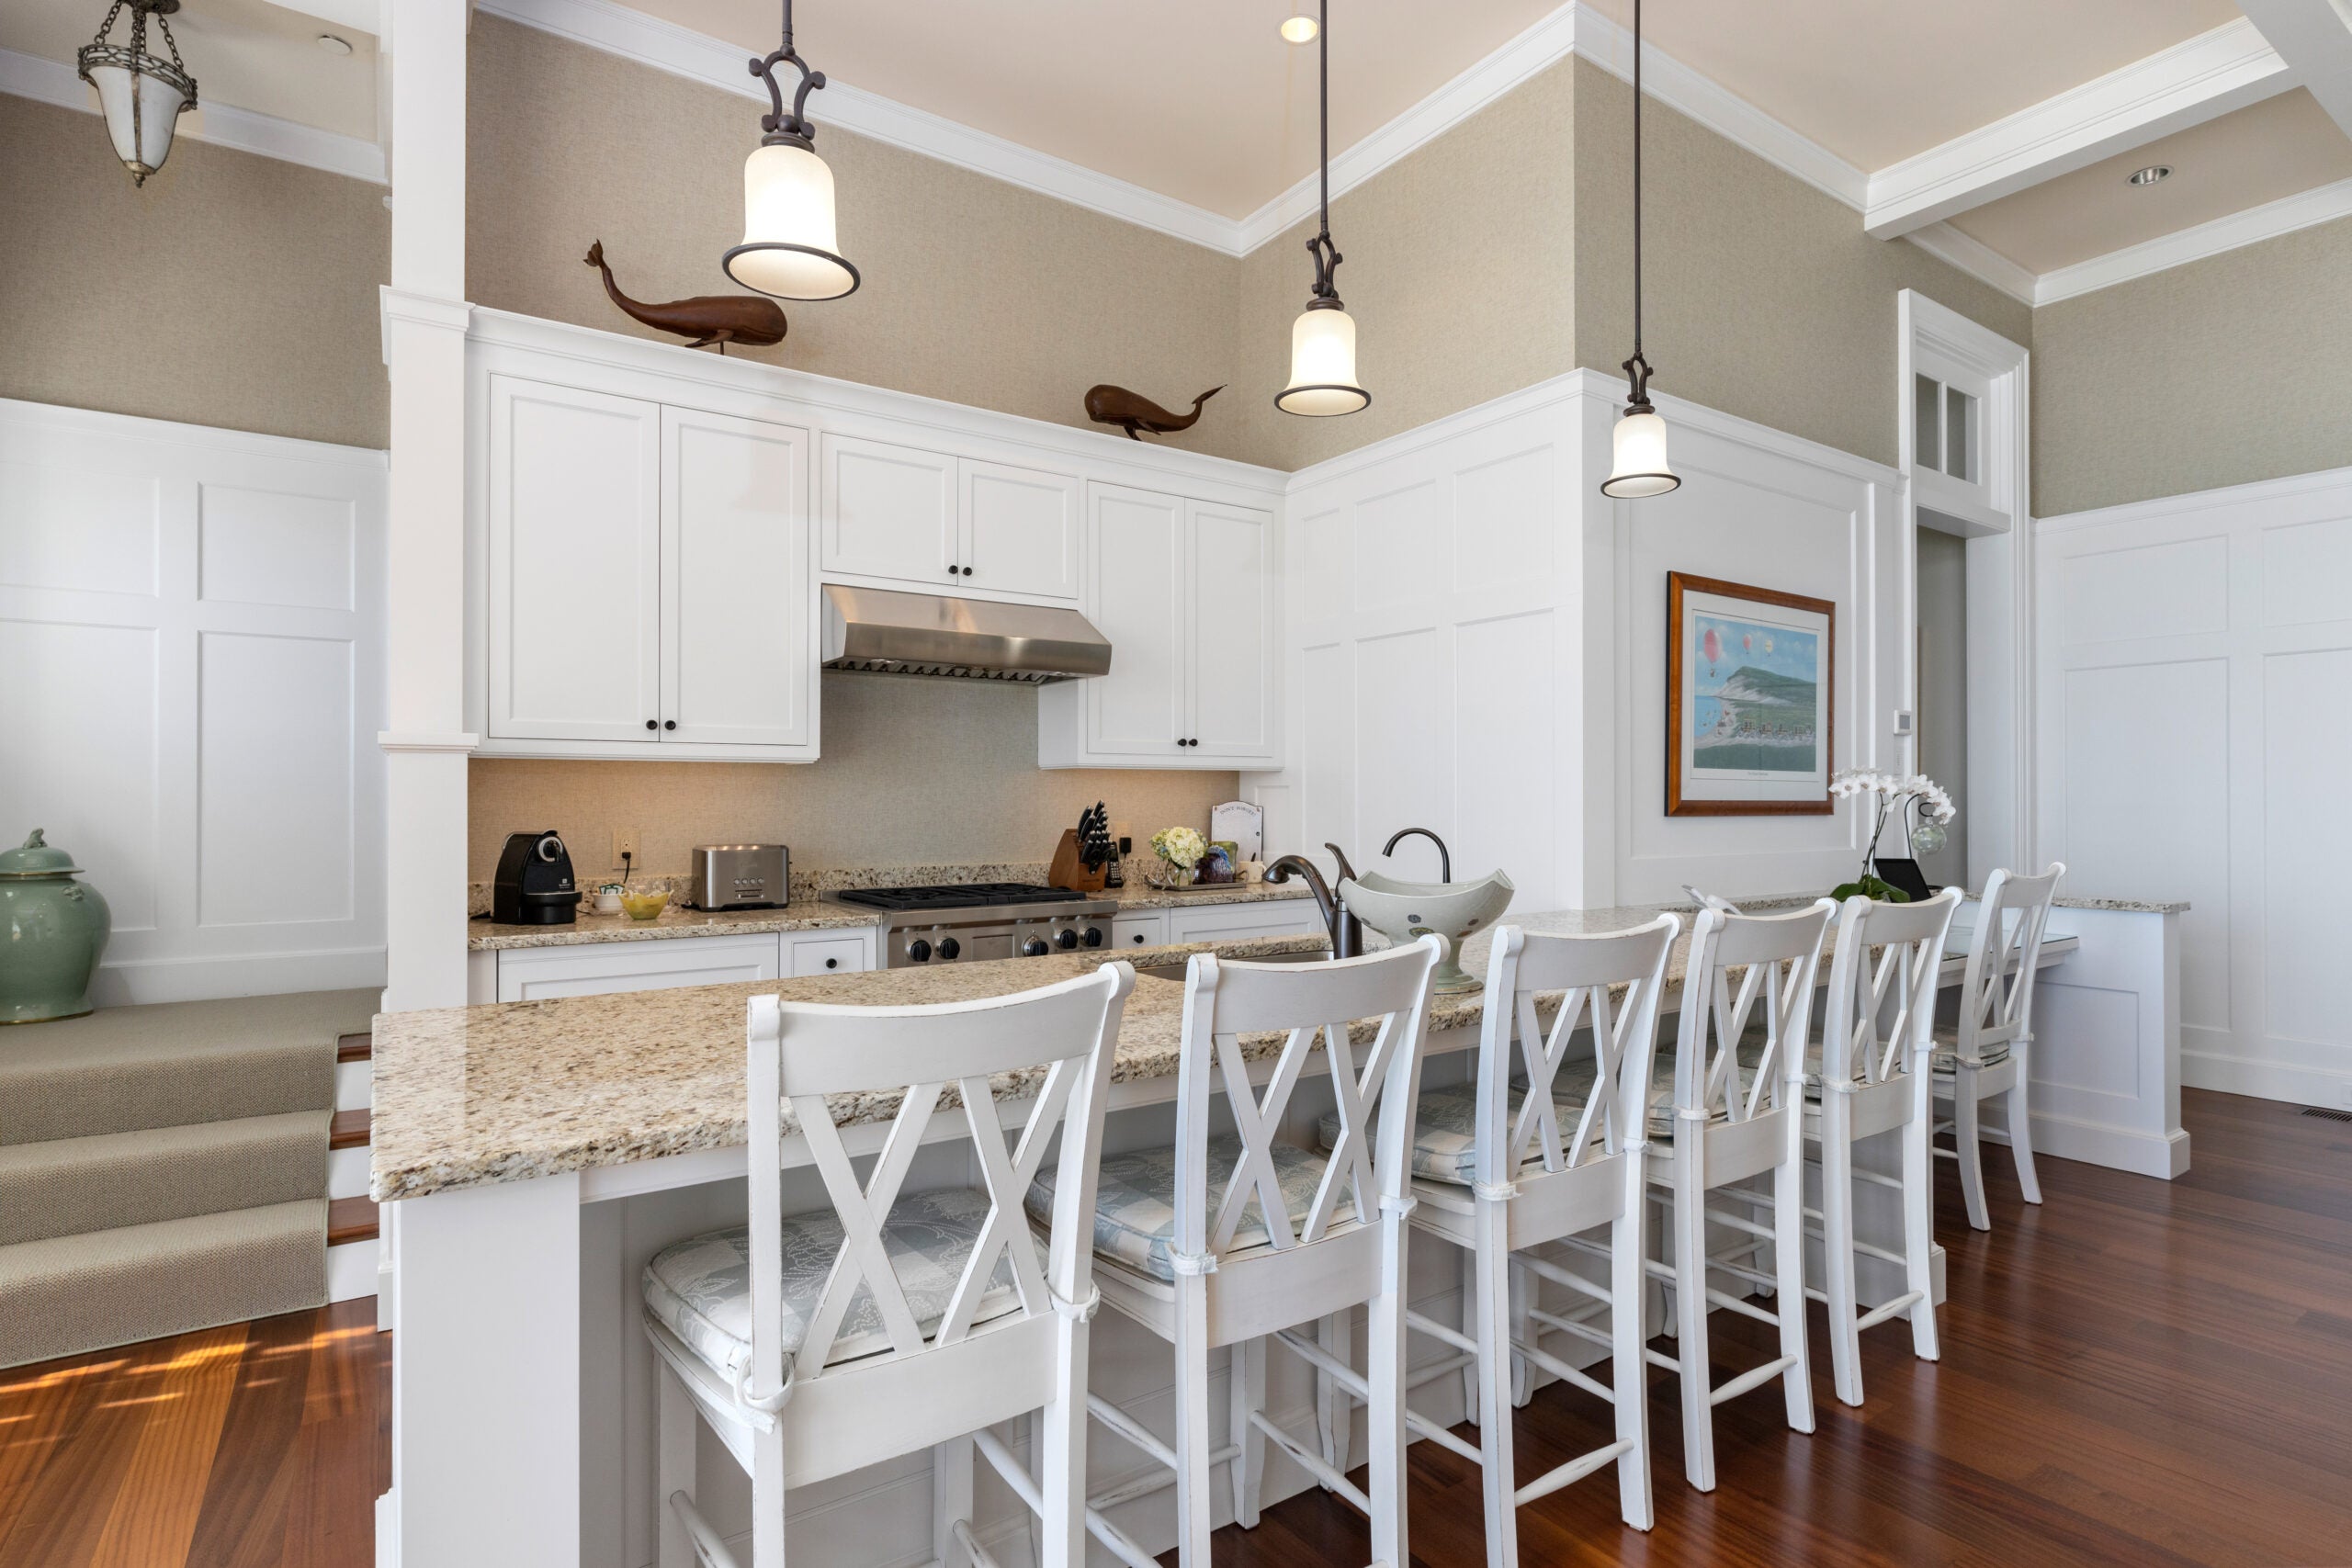 The guest house kitchen, which has a long granite-topped counter with seating for six, white raised-panel cabinetry, crown molding, three pendant lights, recessed lighting, beige walls, hardwood flooring, and board-and-batten wainscoting.